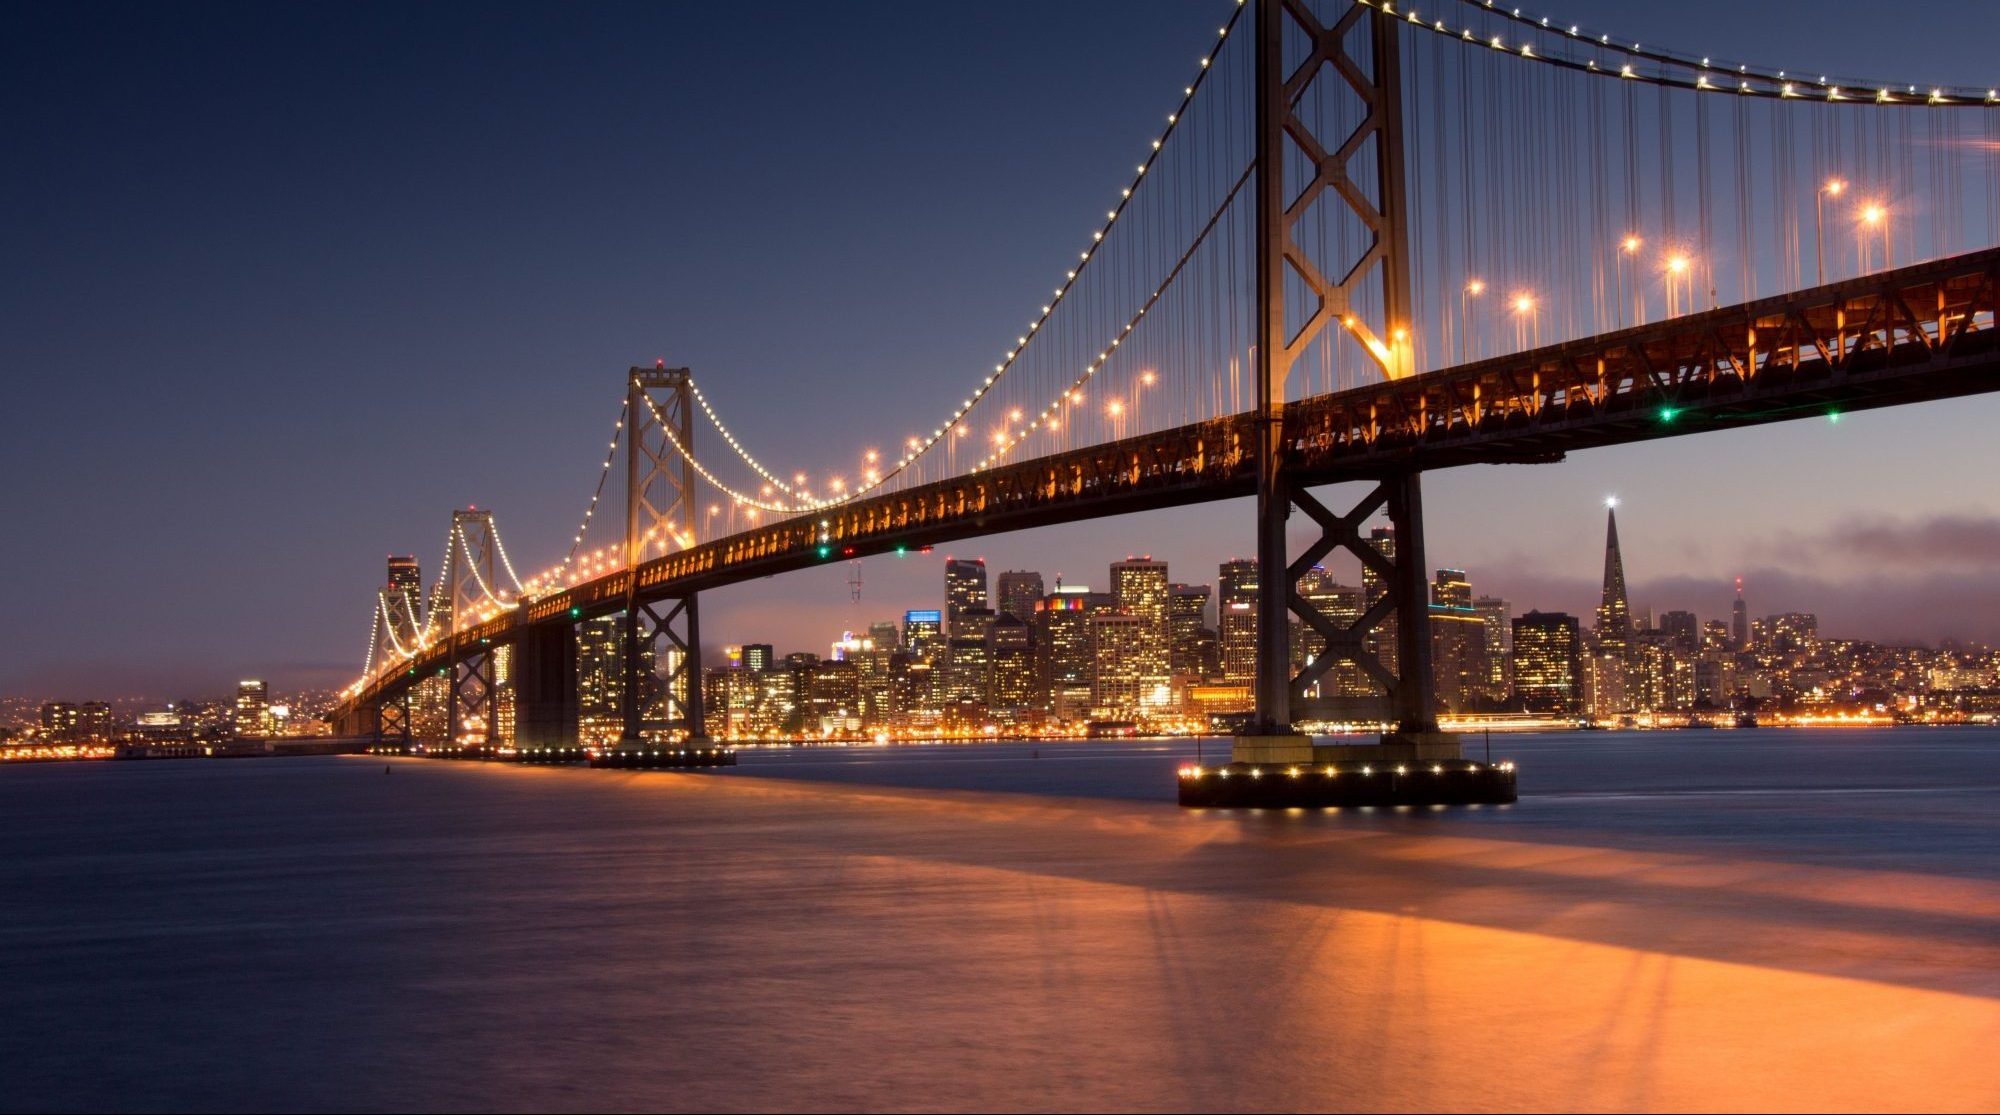 An image of the Golden Gate Bridge at night. If you have been discriminated against, contact the Oakland discrimination attorneys at The Law Office of Jeannette Vaccaro.